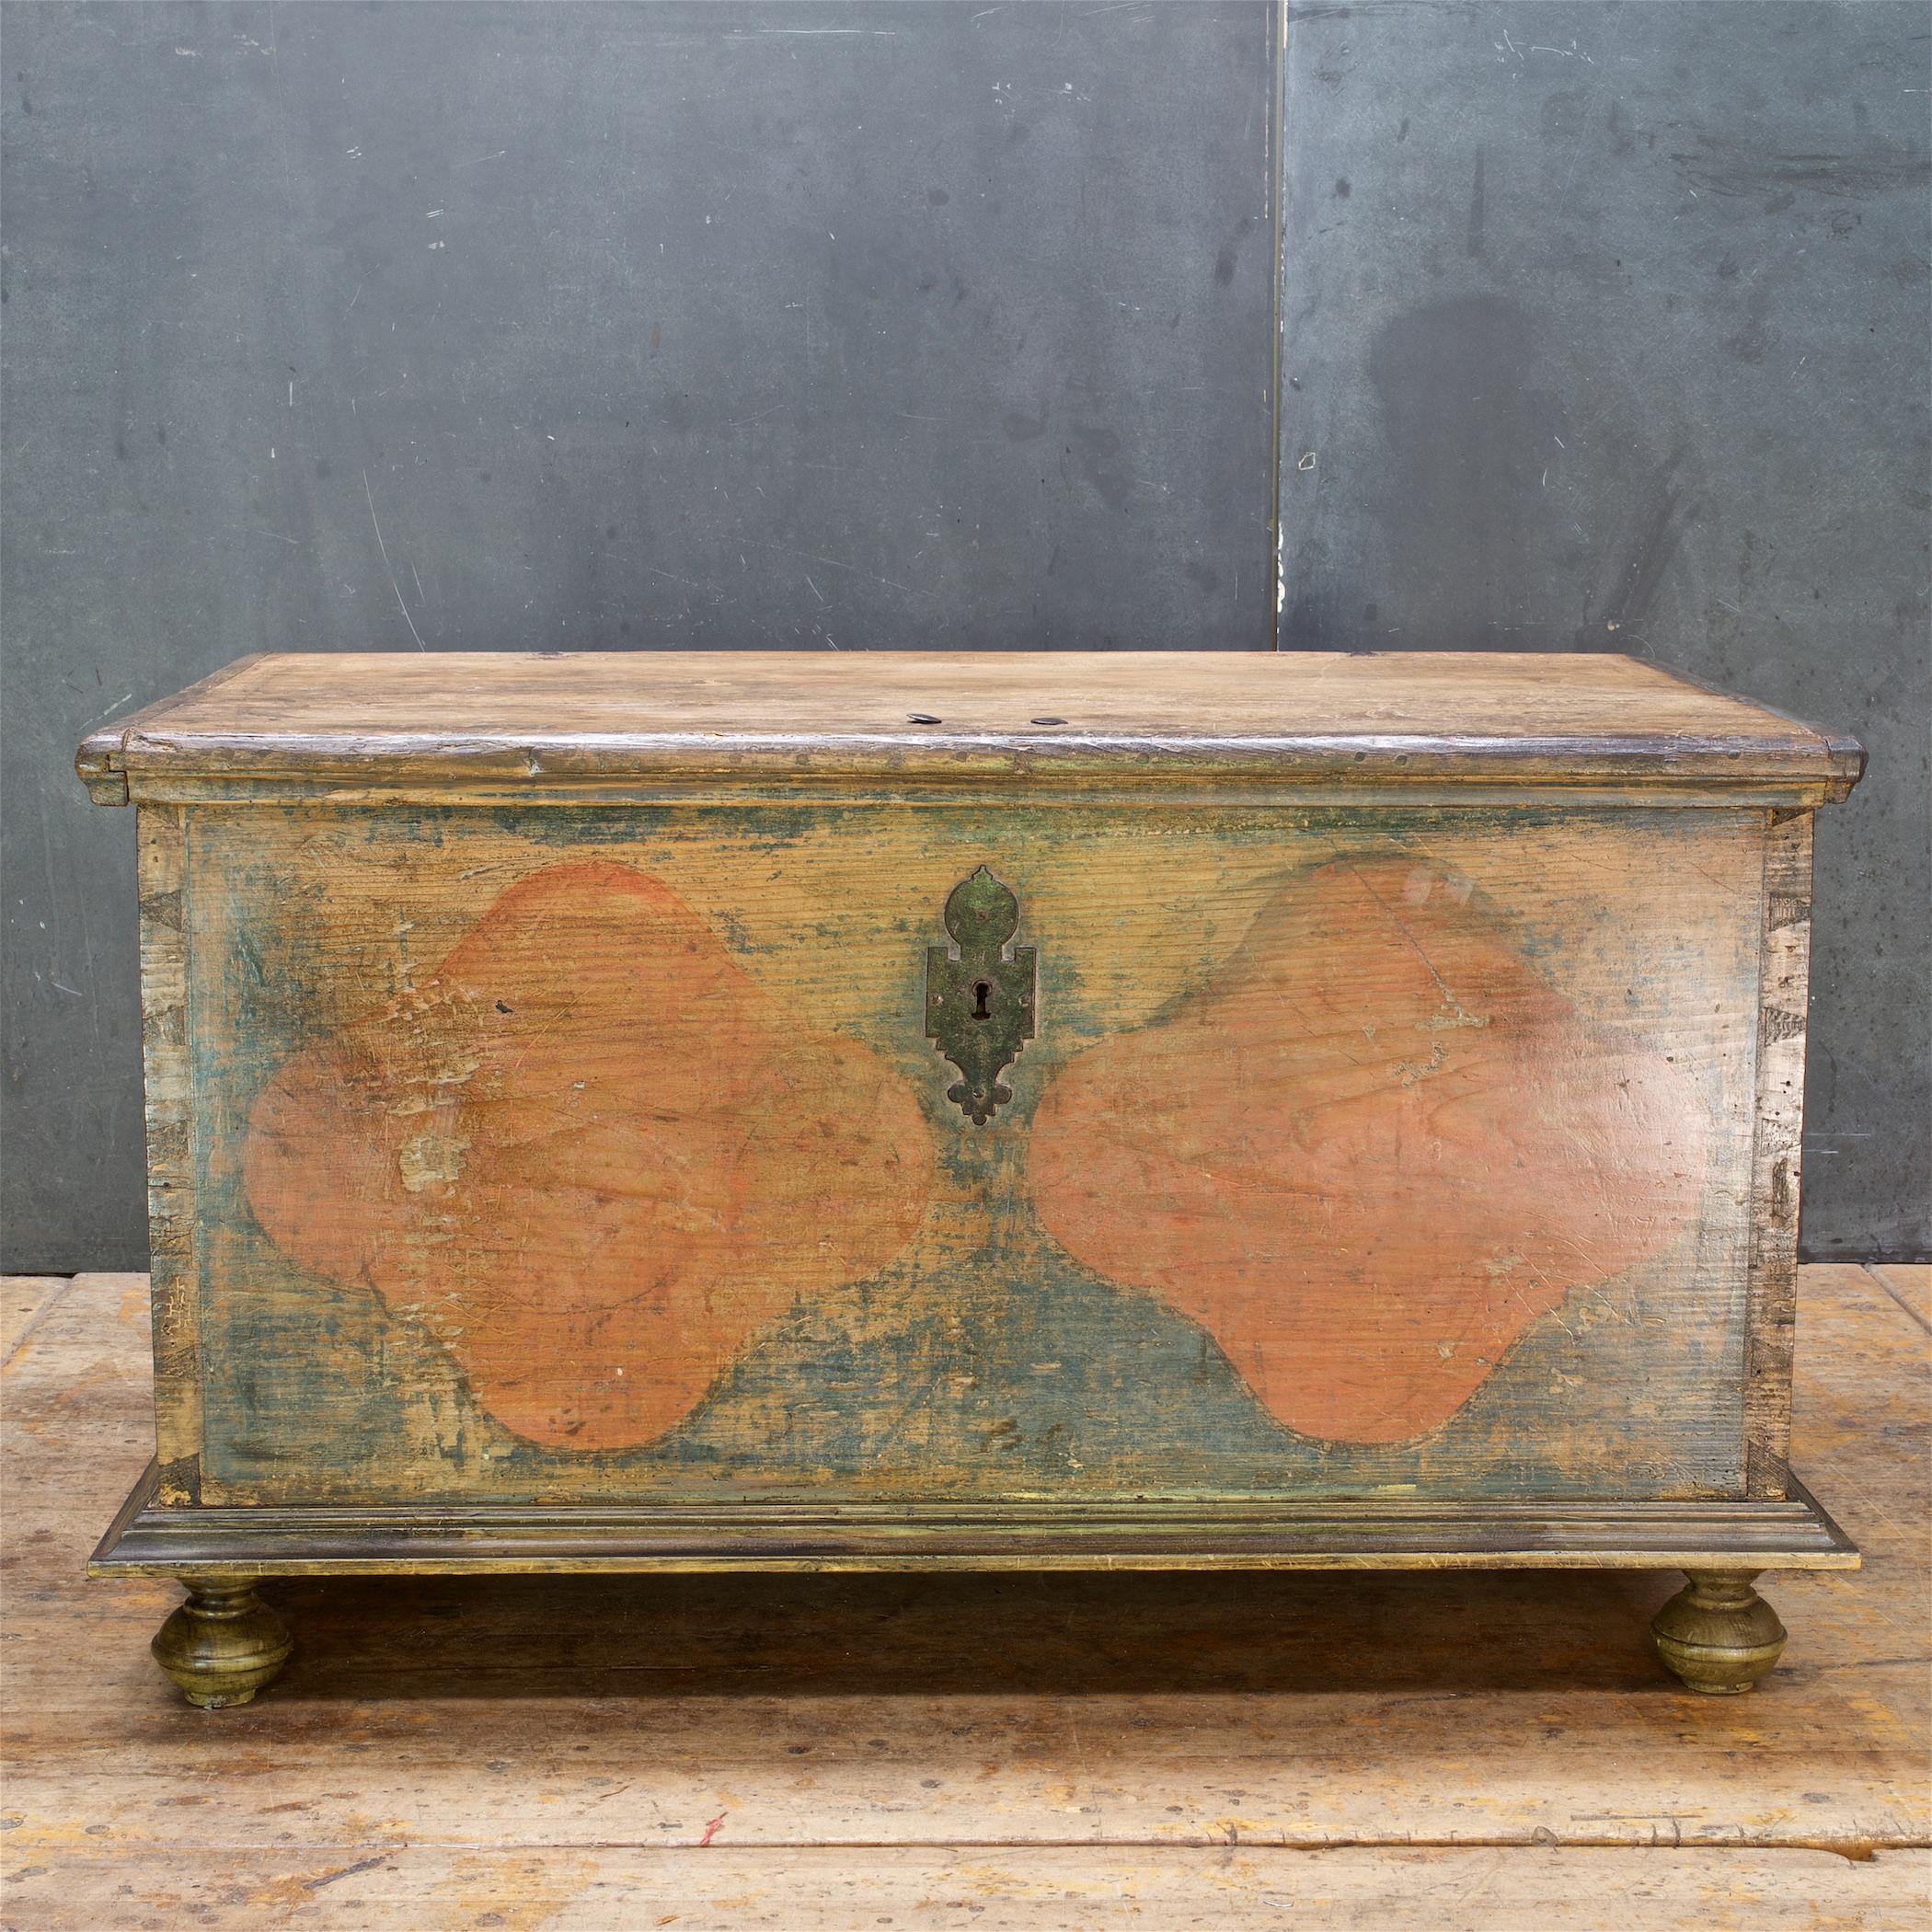 Very old Scandinavian trunk, late 1700s-early 1800s with some faint hand painted decorations still visible. Waxed and polished. From a Norwegian and then Kenya State Department Official's Estate in Bethesda MD. 